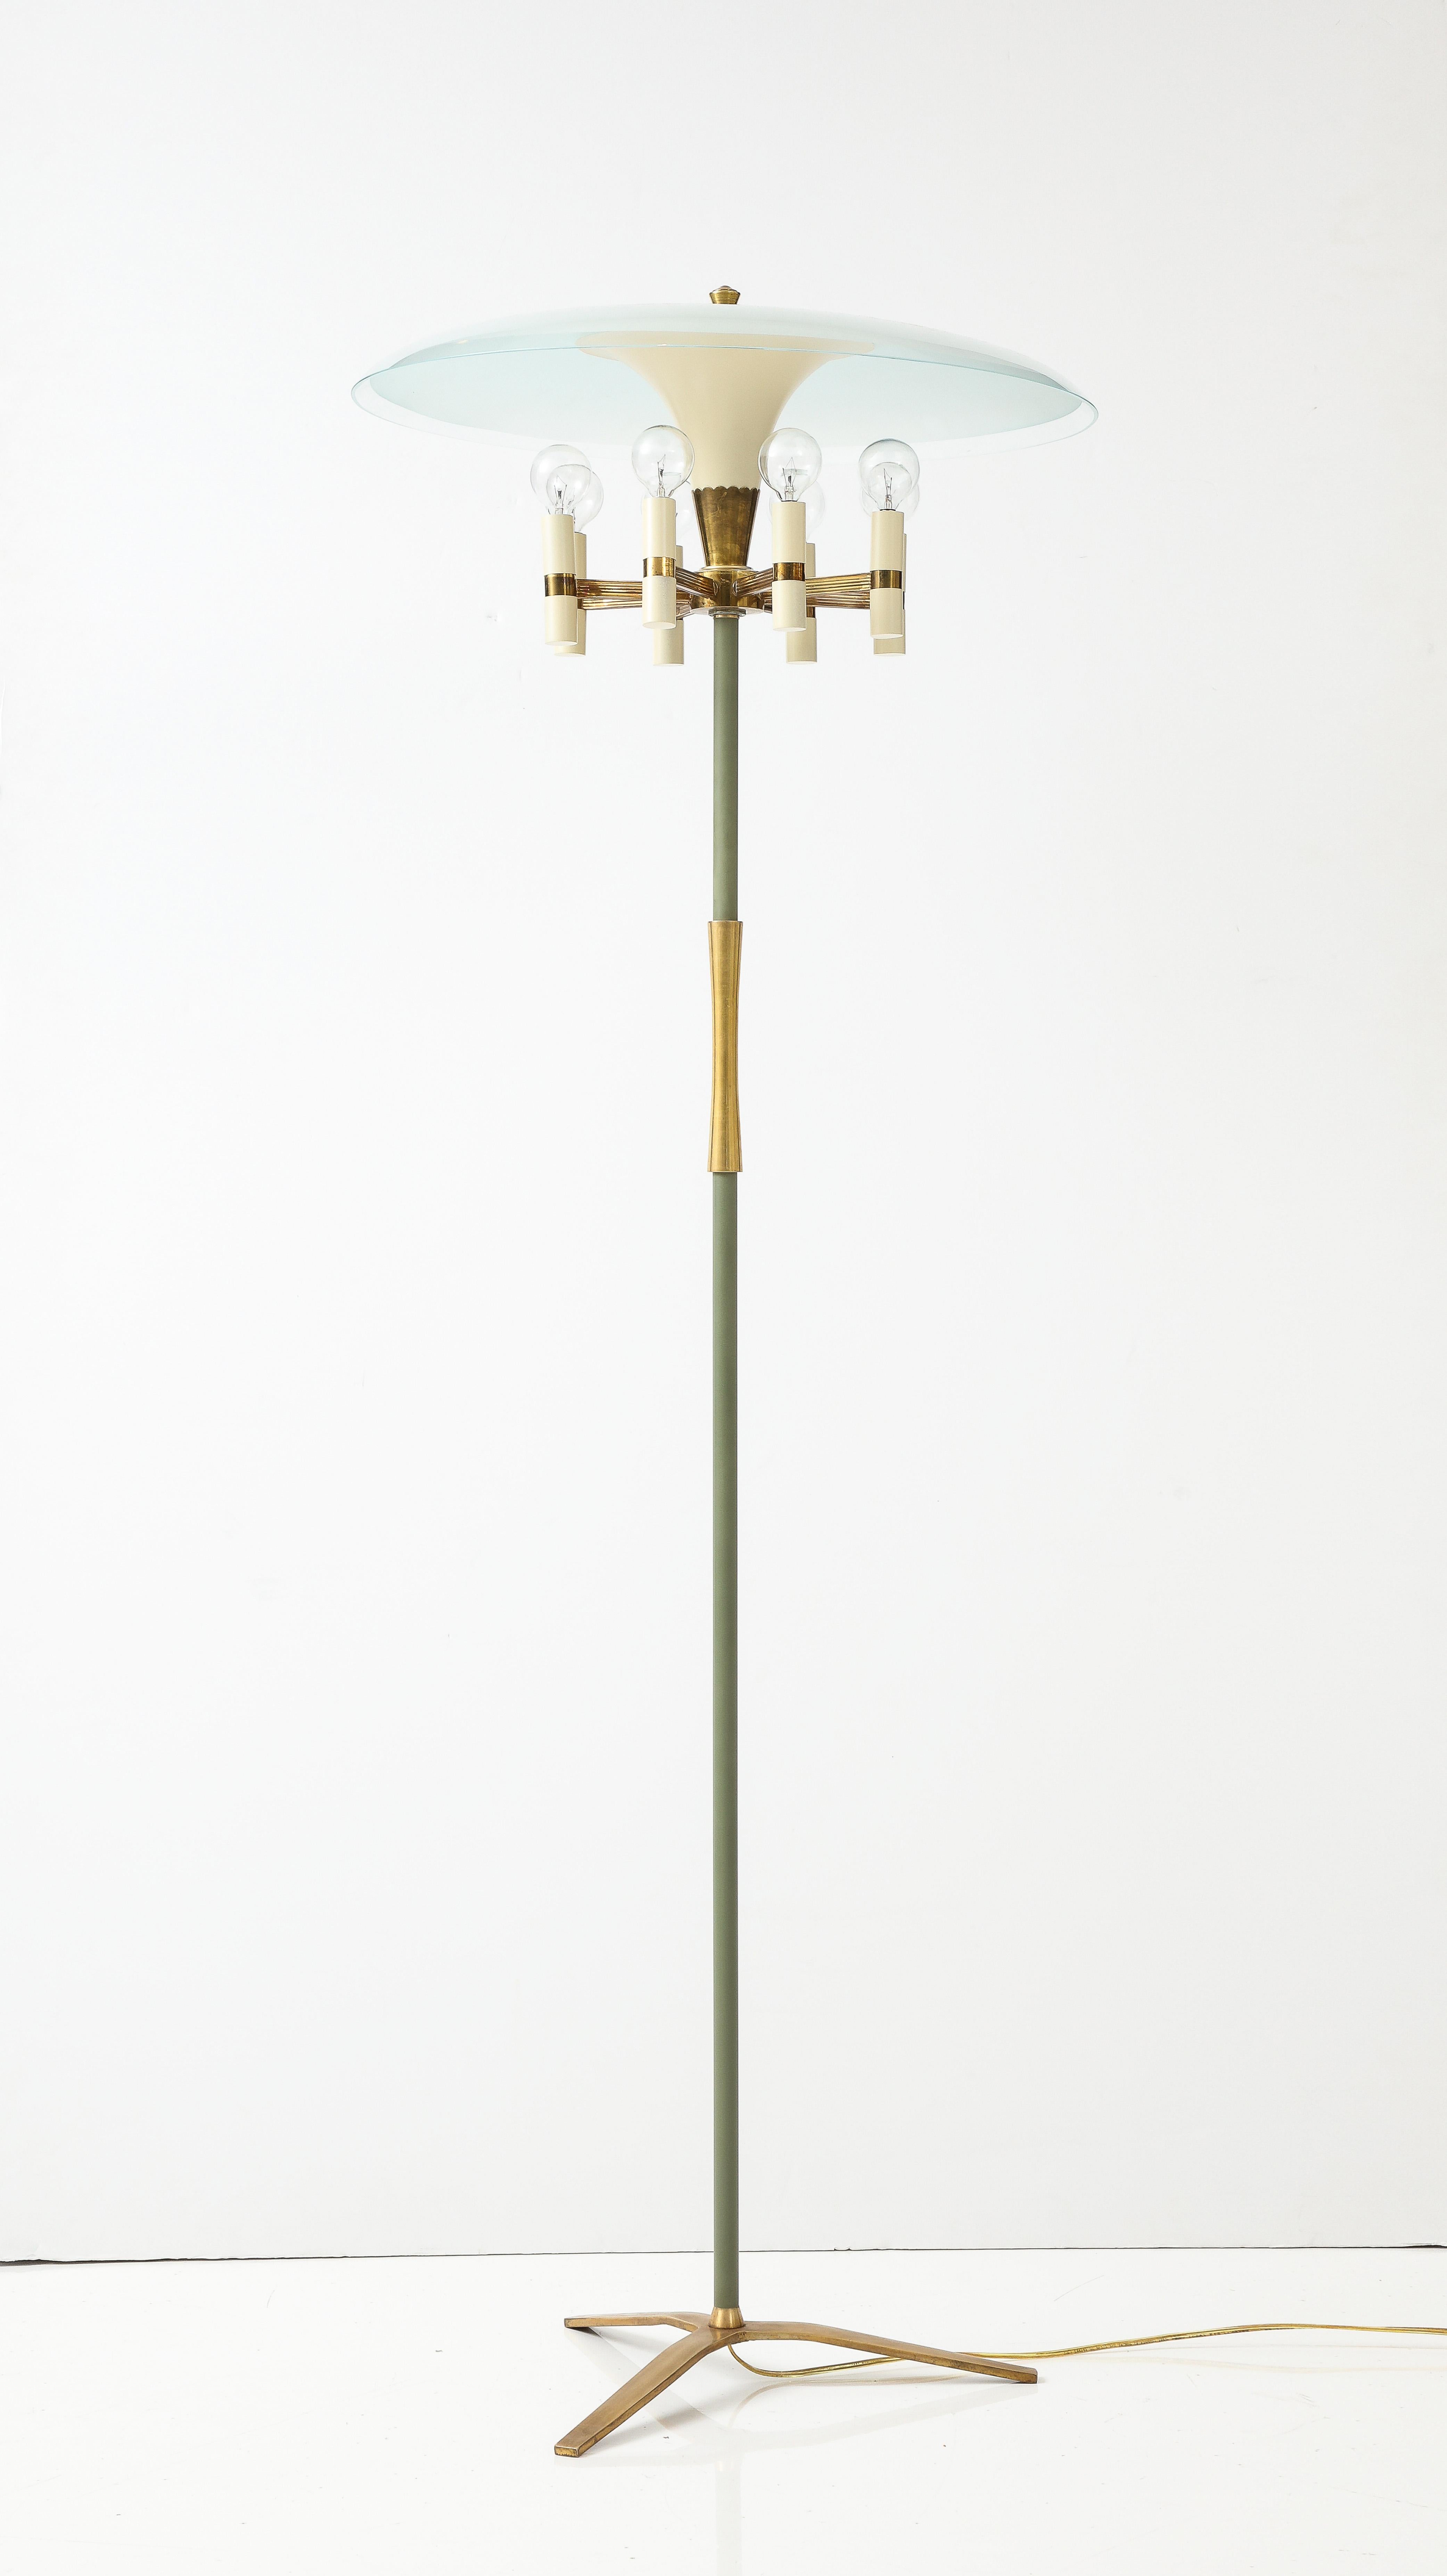 1950s Arredoluce Style Mid-Century Modern Brass Floor Lamp In Good Condition For Sale In New York, NY